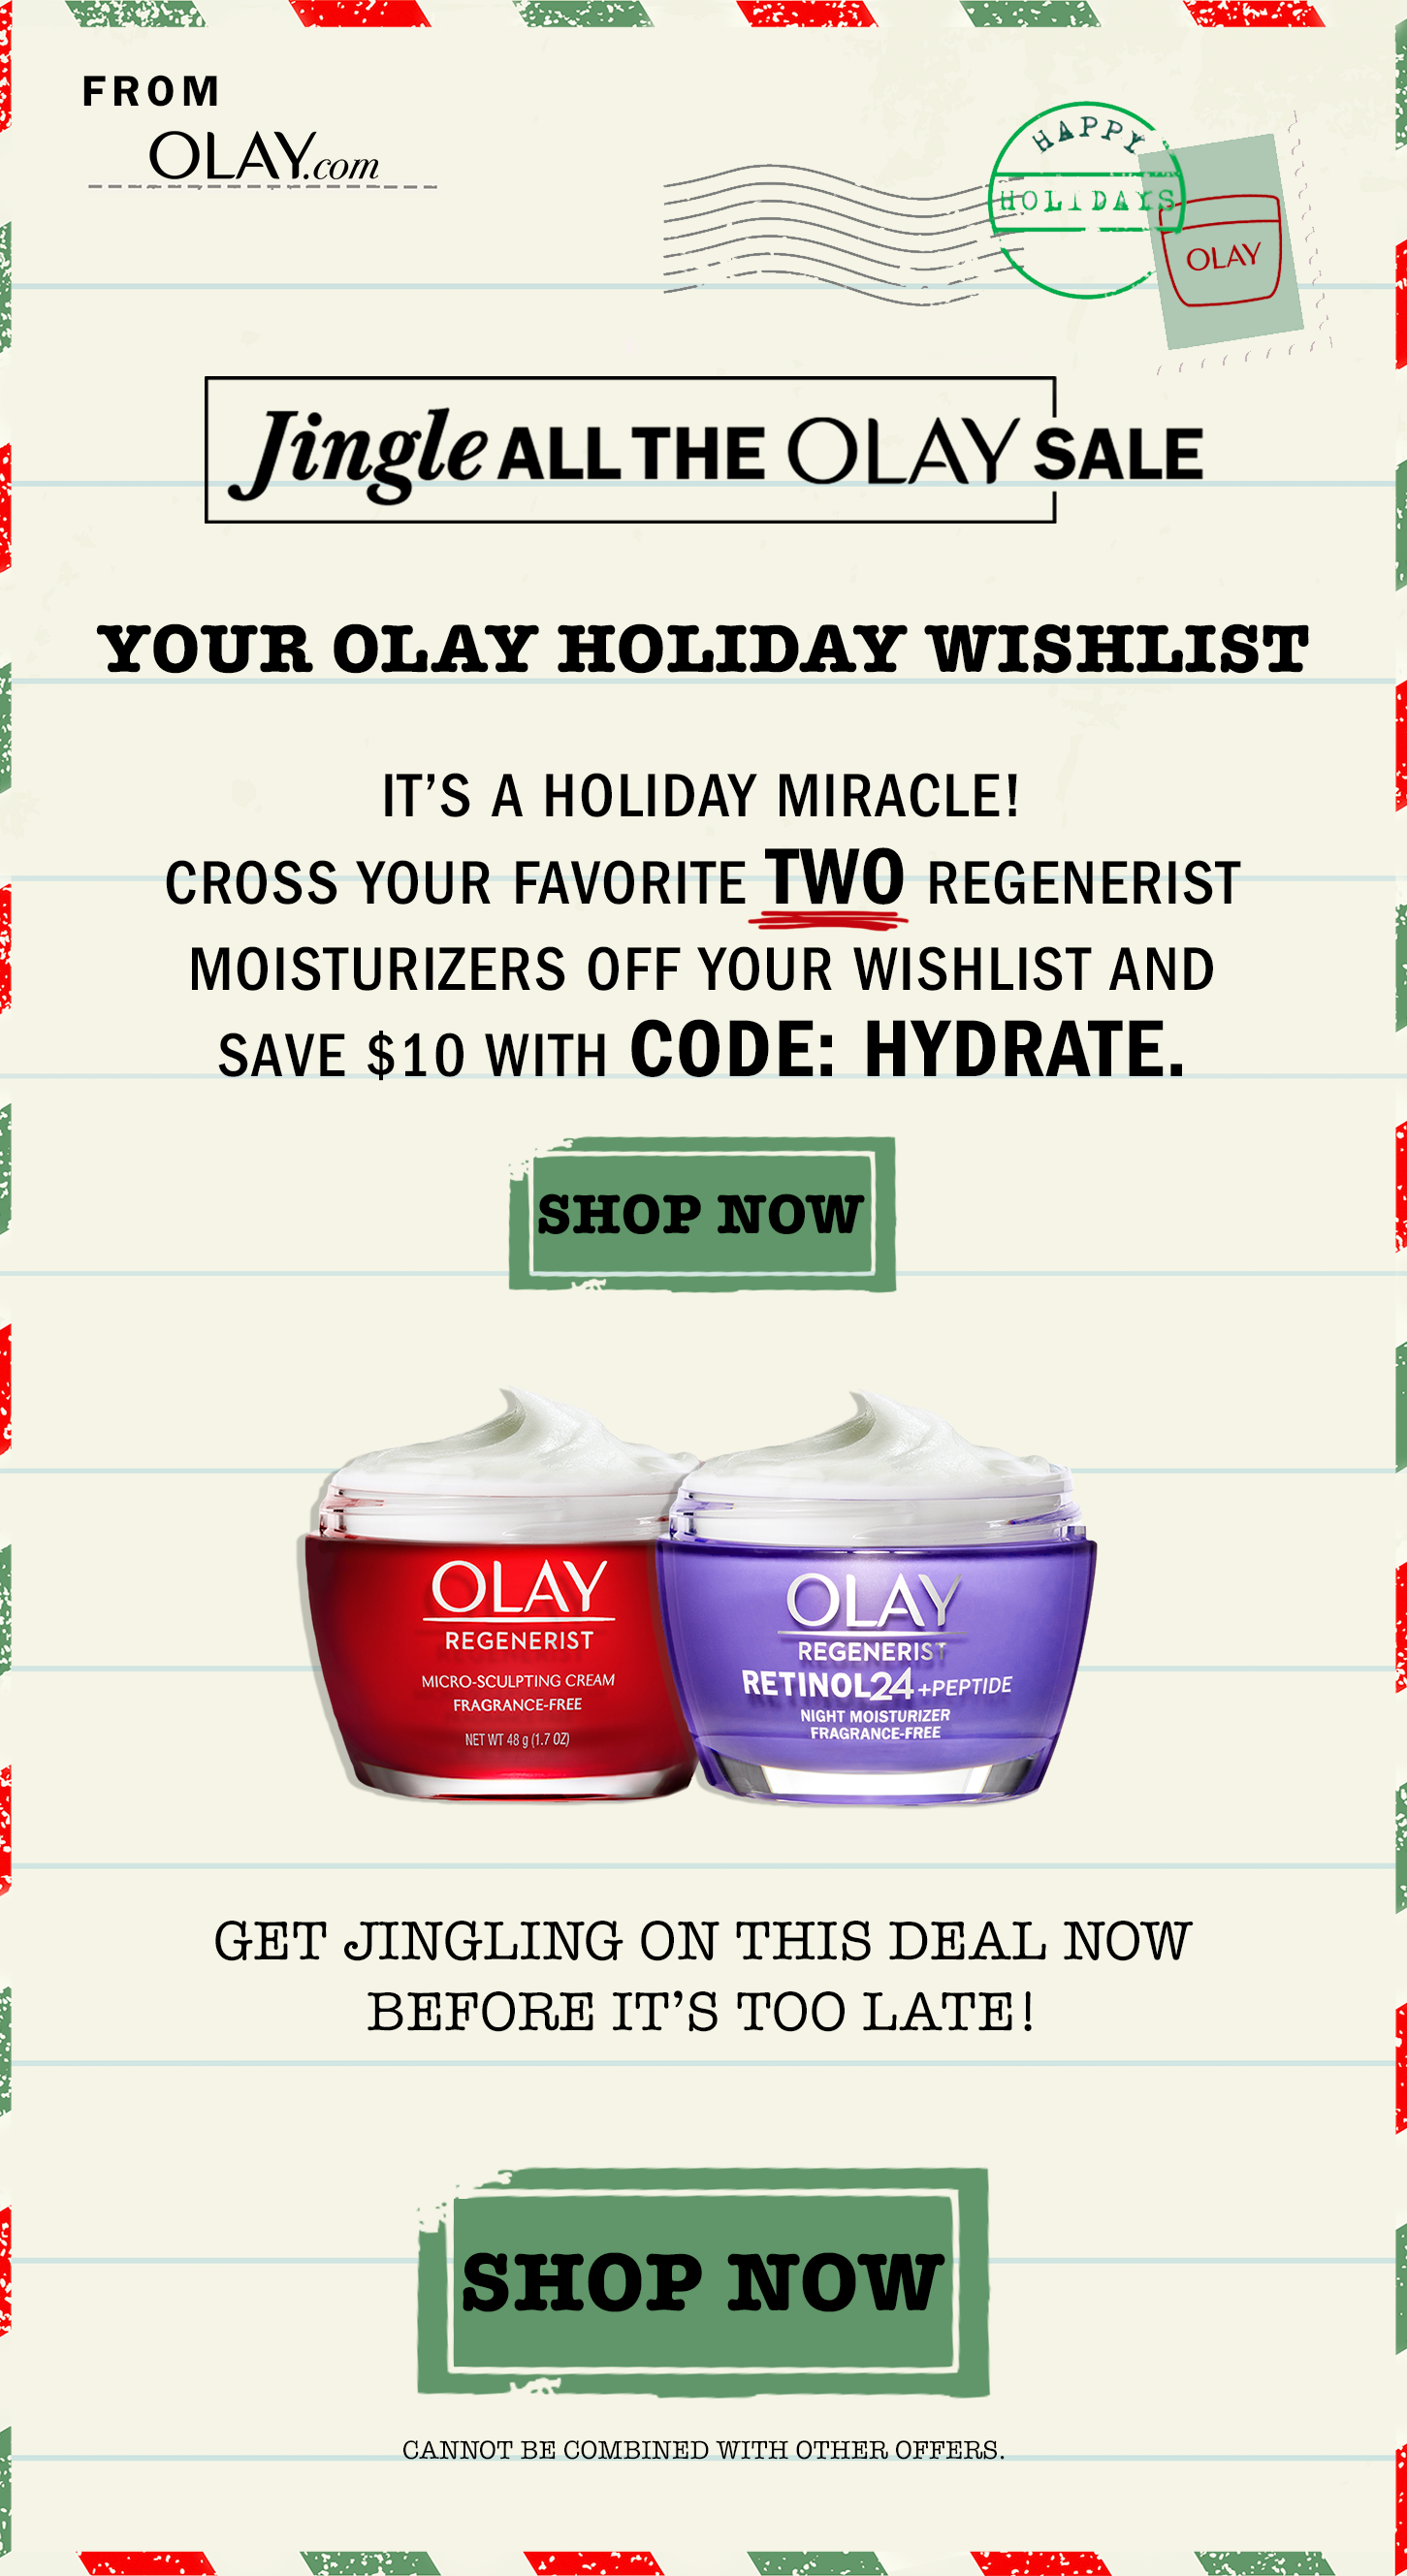 Jingle all the Olay Sale! It's a holiday miracle! Cross your favorite two regenerist moisturizers off your wishlist and save $10 with code Hydrate (cannot be combined with other offers) Shop Now.